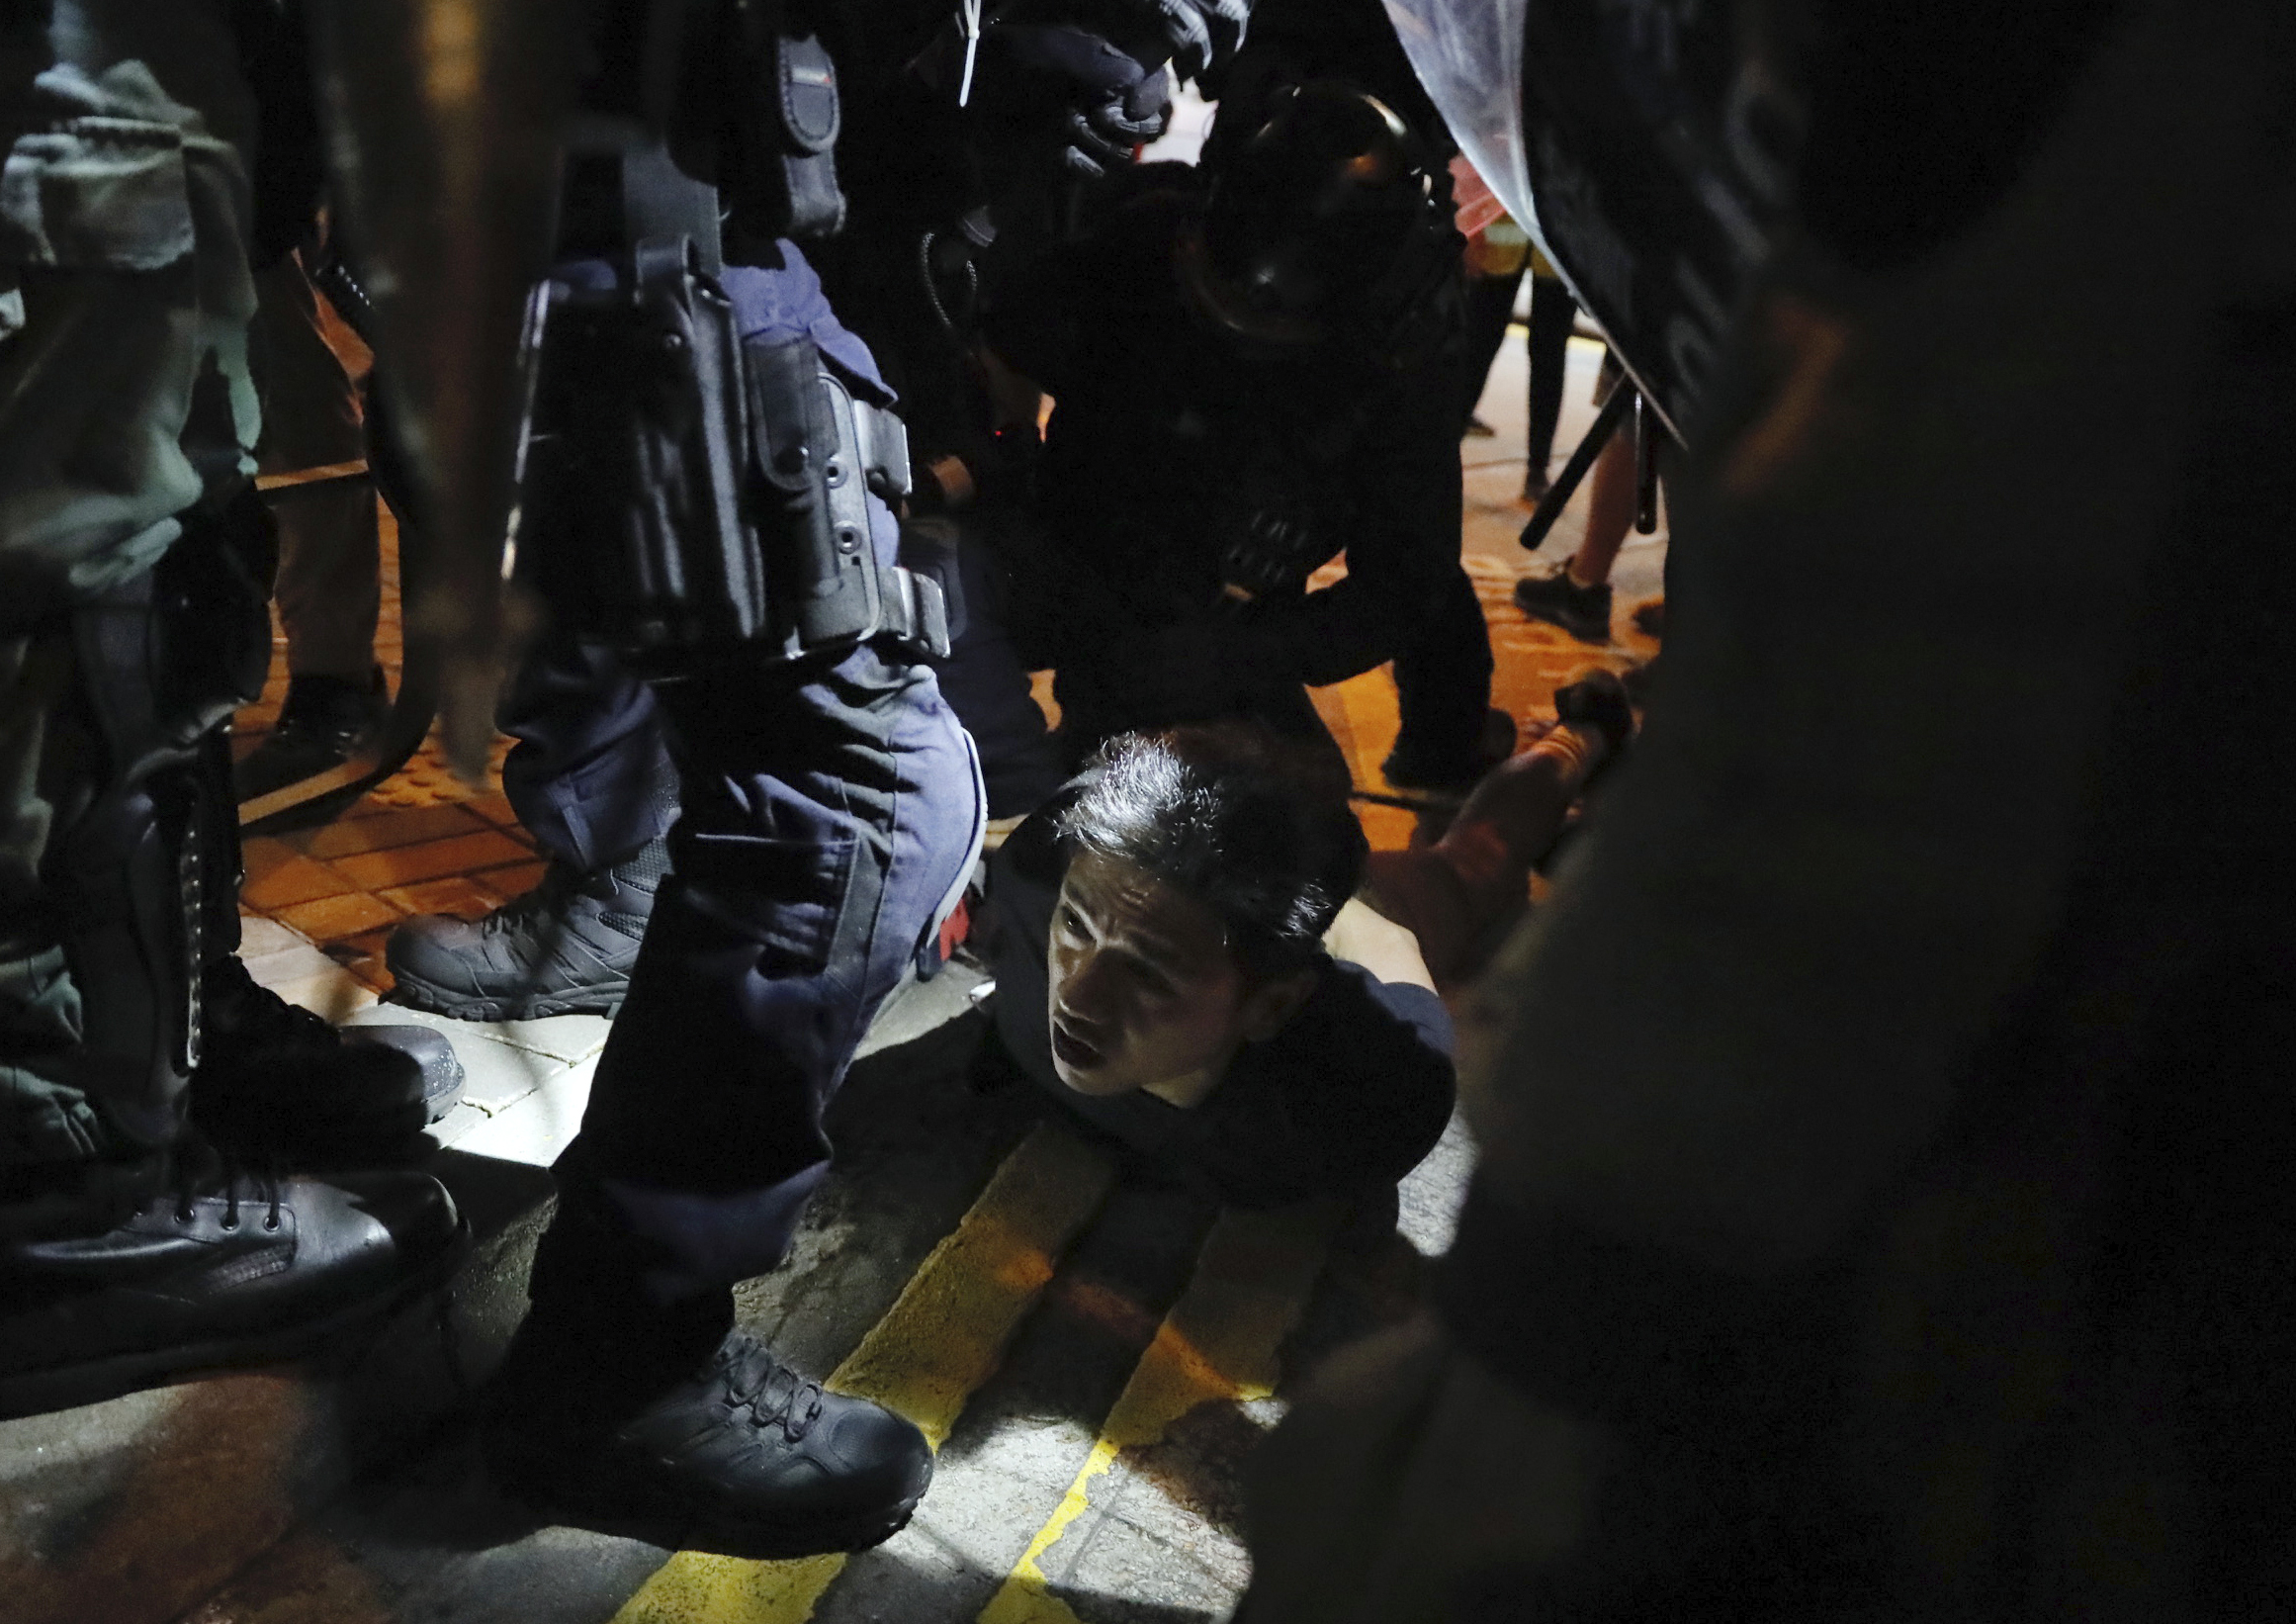 A man is detained by police during street protests in Hong Kong on Saturday, Aug. 3, 2019. Hong Kong protesters removed a Chinese national flag from its pole and flung it into the city's iconic Victoria Harbour on Saturday, and police later fired tear gas at demonstrators after some of them vandalized a police station. (AP Photo/Kin Cheung)